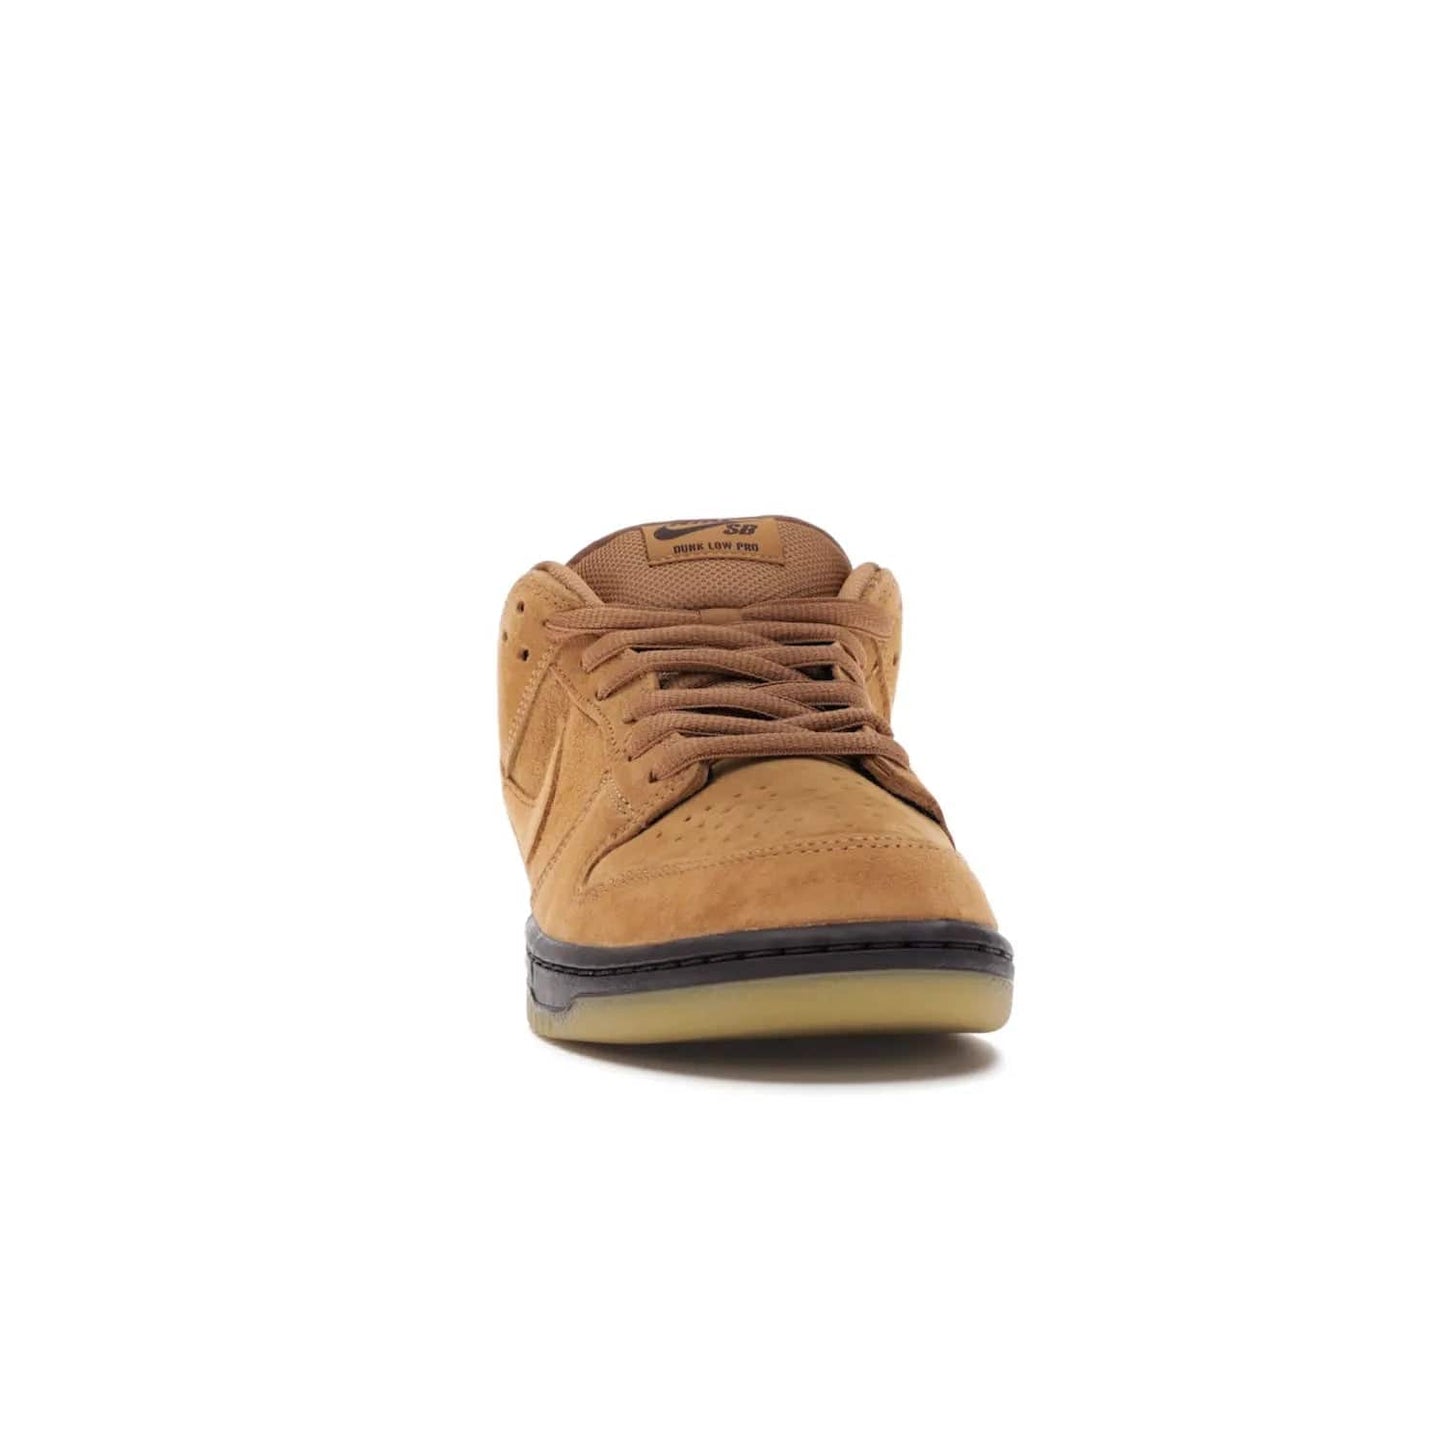 Nike SB Dunk Low Wheat (2021/2023) - Image 9 - Only at www.BallersClubKickz.com - The Nike SB Dunk Low Wheat (2021/2023)has a sleek silhouette and wheat suede upper. Tan tones for lining, mesh tongues, and laces. Iconic color palette midsole, perforated boxing toe. Brown branding on tongue and heel. Gum rubber outsole with partitioned pattern for traction. Eschewed in Feb 2021 for $110.